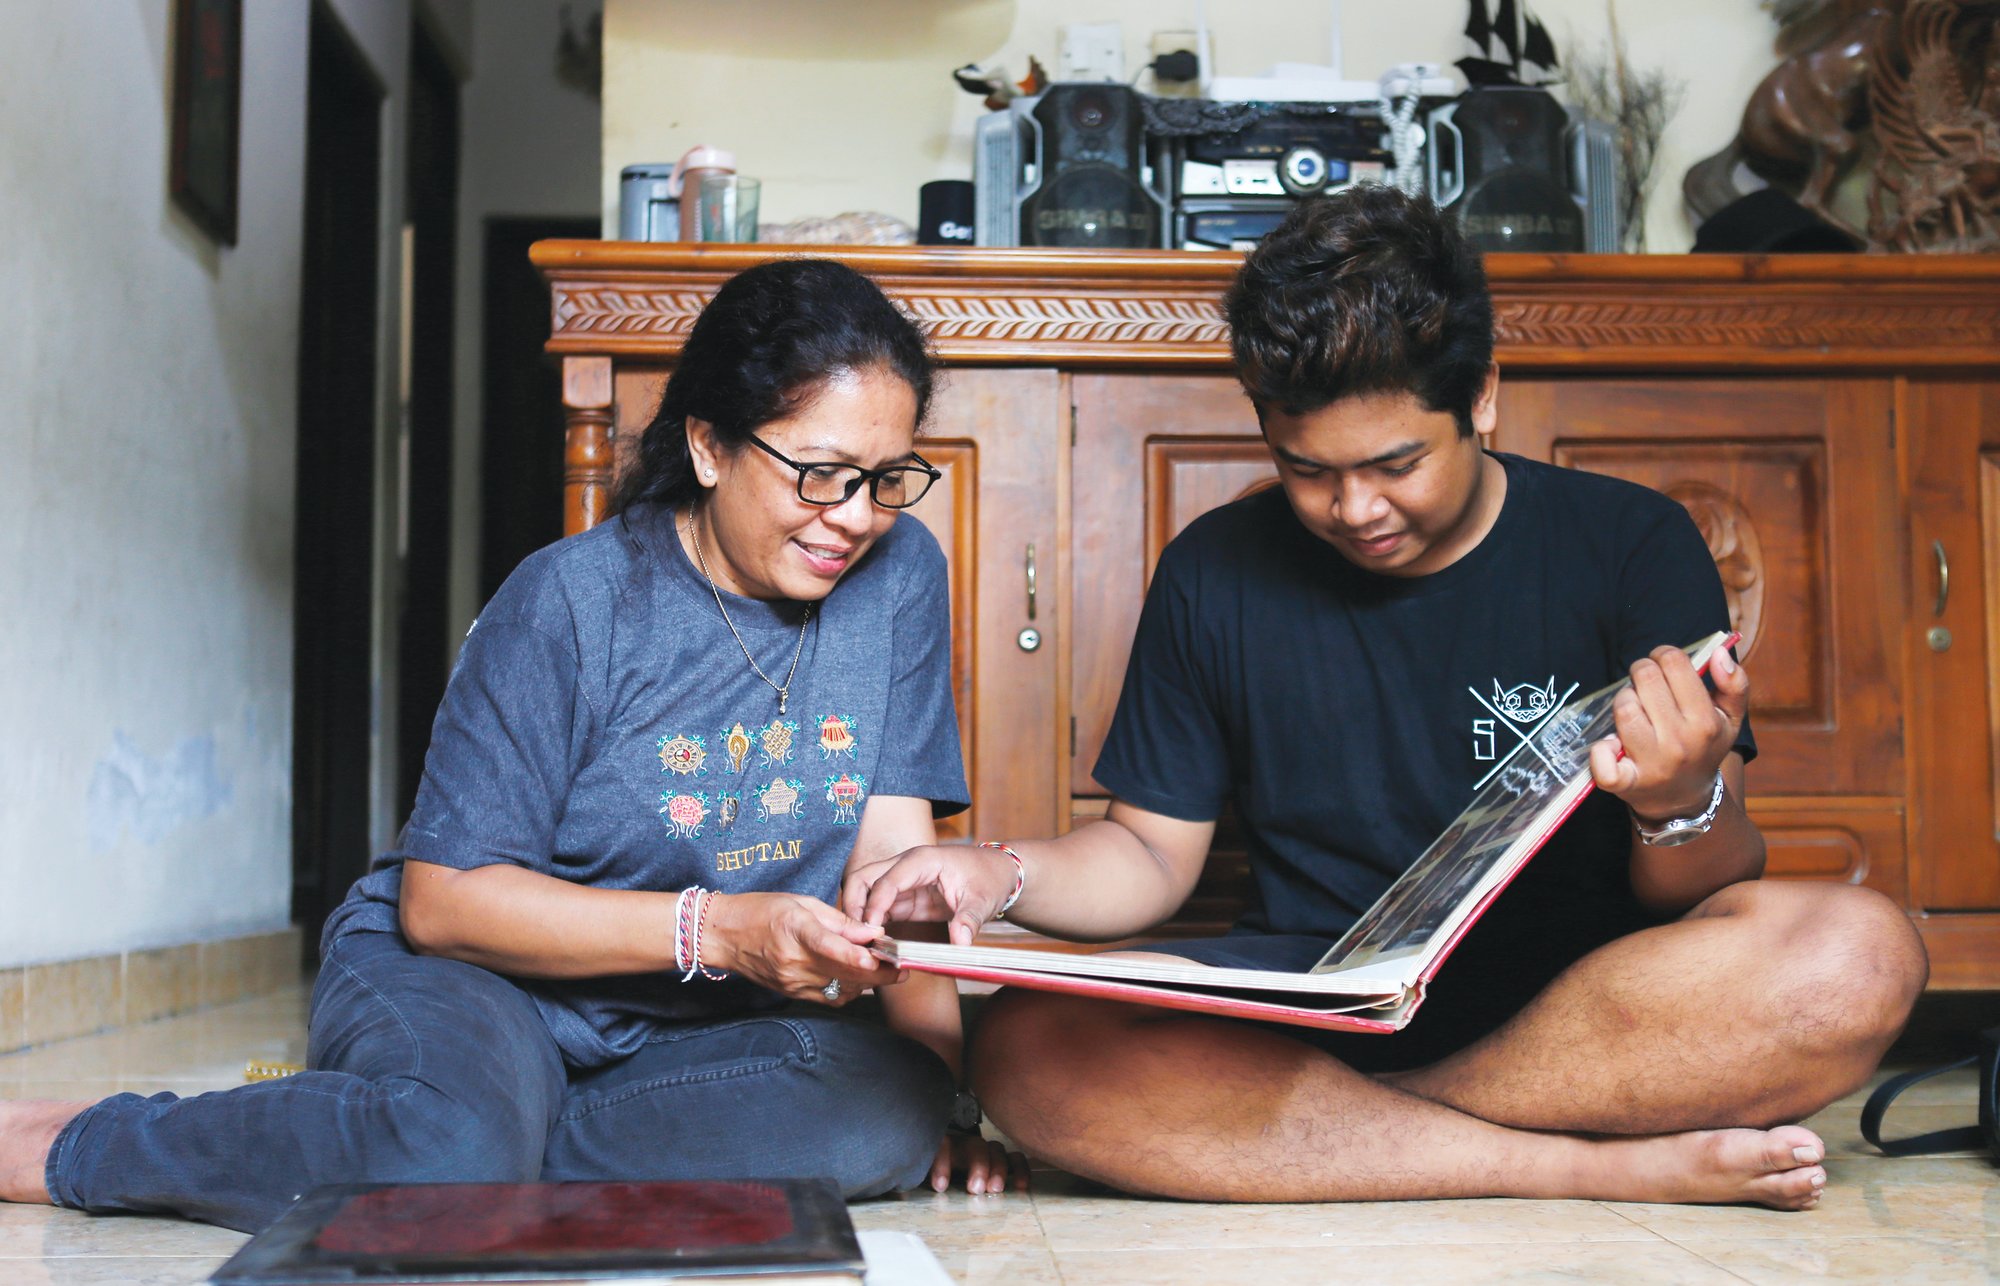 Ni Luh Erniati and her son, Made, go through family photo albums which show her late husband and his late father, Gede Badrawan, in Bali, Indonesia.  Gede was one of 202 people killed in the 2002 Bali bombings. After his death, the sight of Erniati's tears made Made cry, so she shut herself in the bathroom to weep alone. She spent years telling him that his father was simply away for work. He was 9 before she told him the truth.